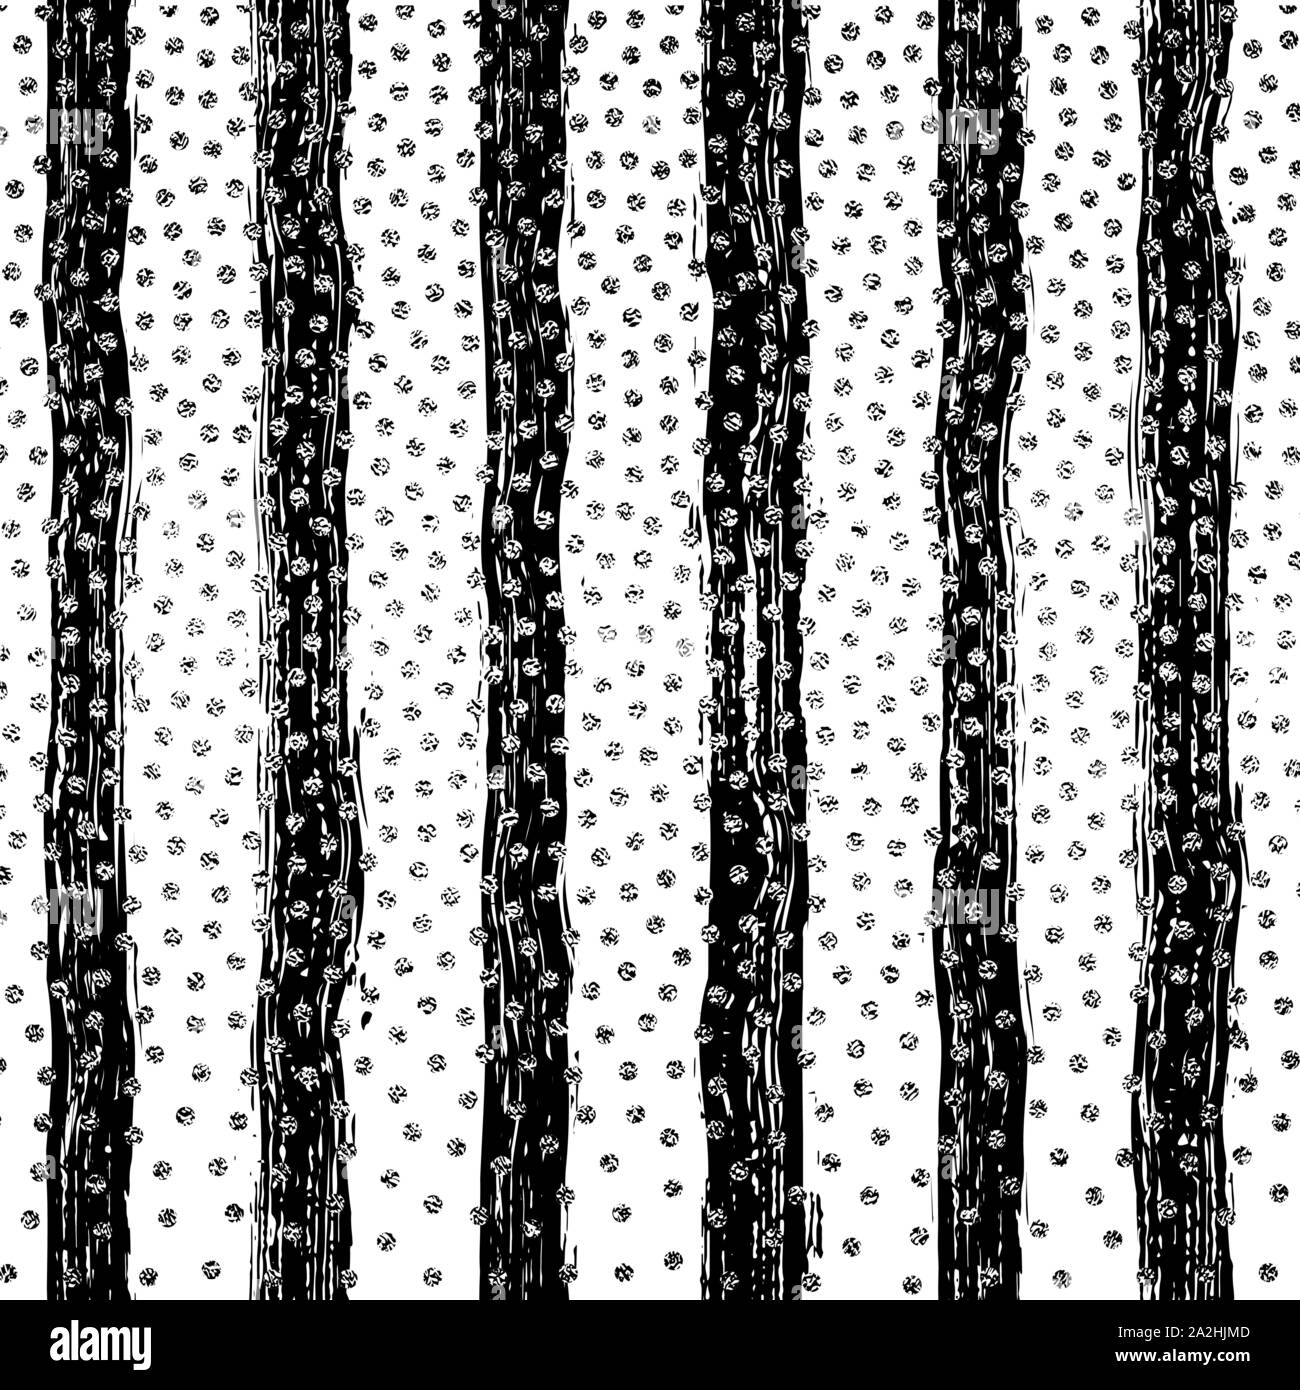 Striped seamless pattern with vertical line. Black and white fashion graphics design. Strict graphic background. Retro style. Template for wallpaper, wrapping, textile, fabric. Vector Illustration. Hand painted brush strokes. Striped background. Vector illustration. Silver circles Stock Vector